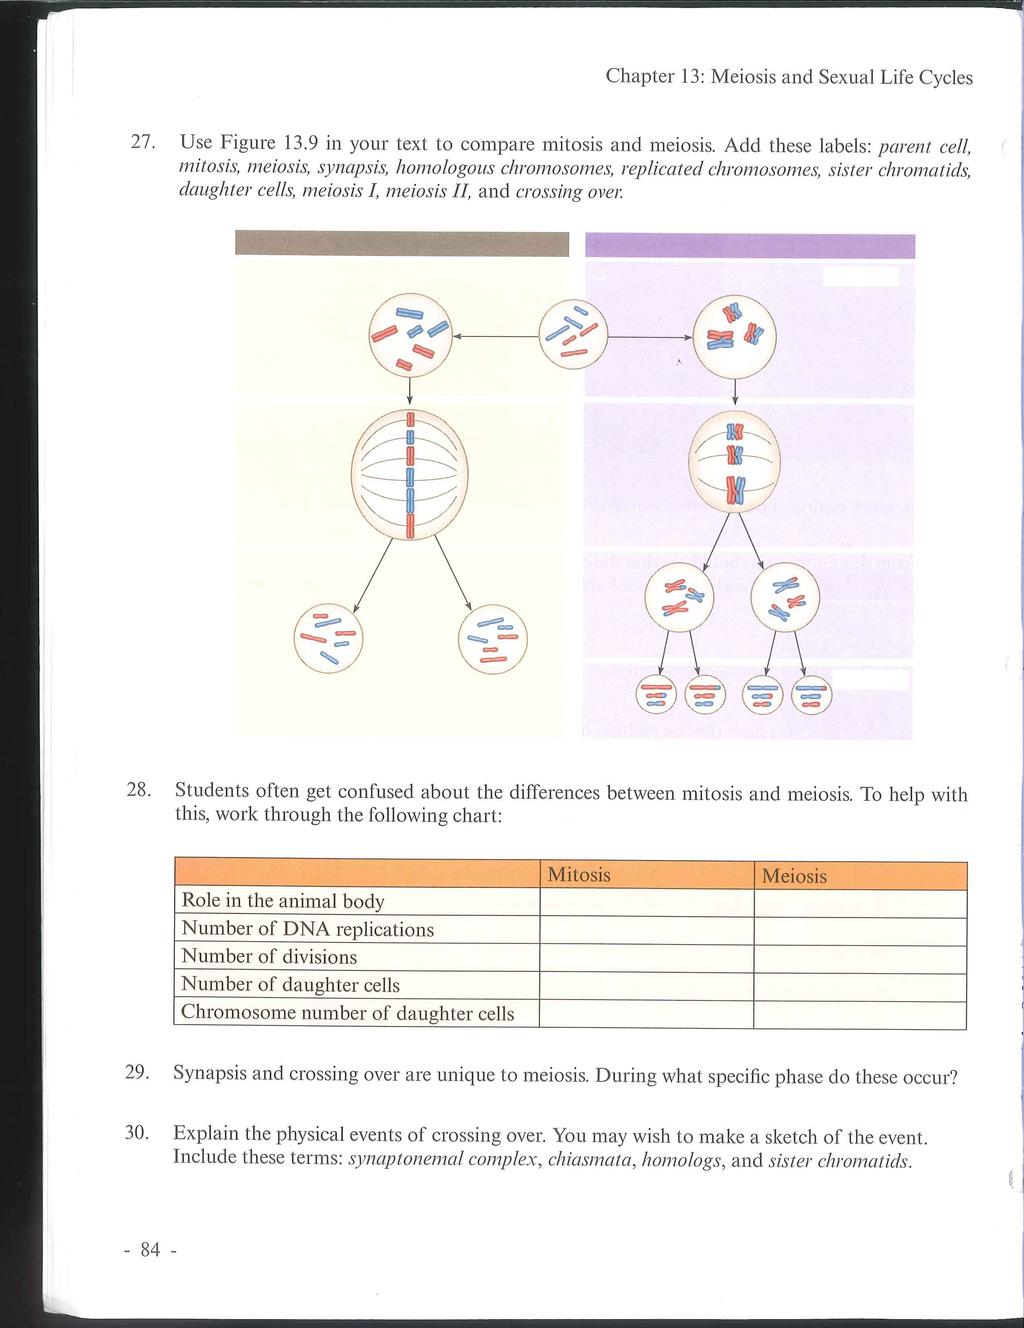 27. Use Figure 13.9 in your text to compare mitosis and meiosis.